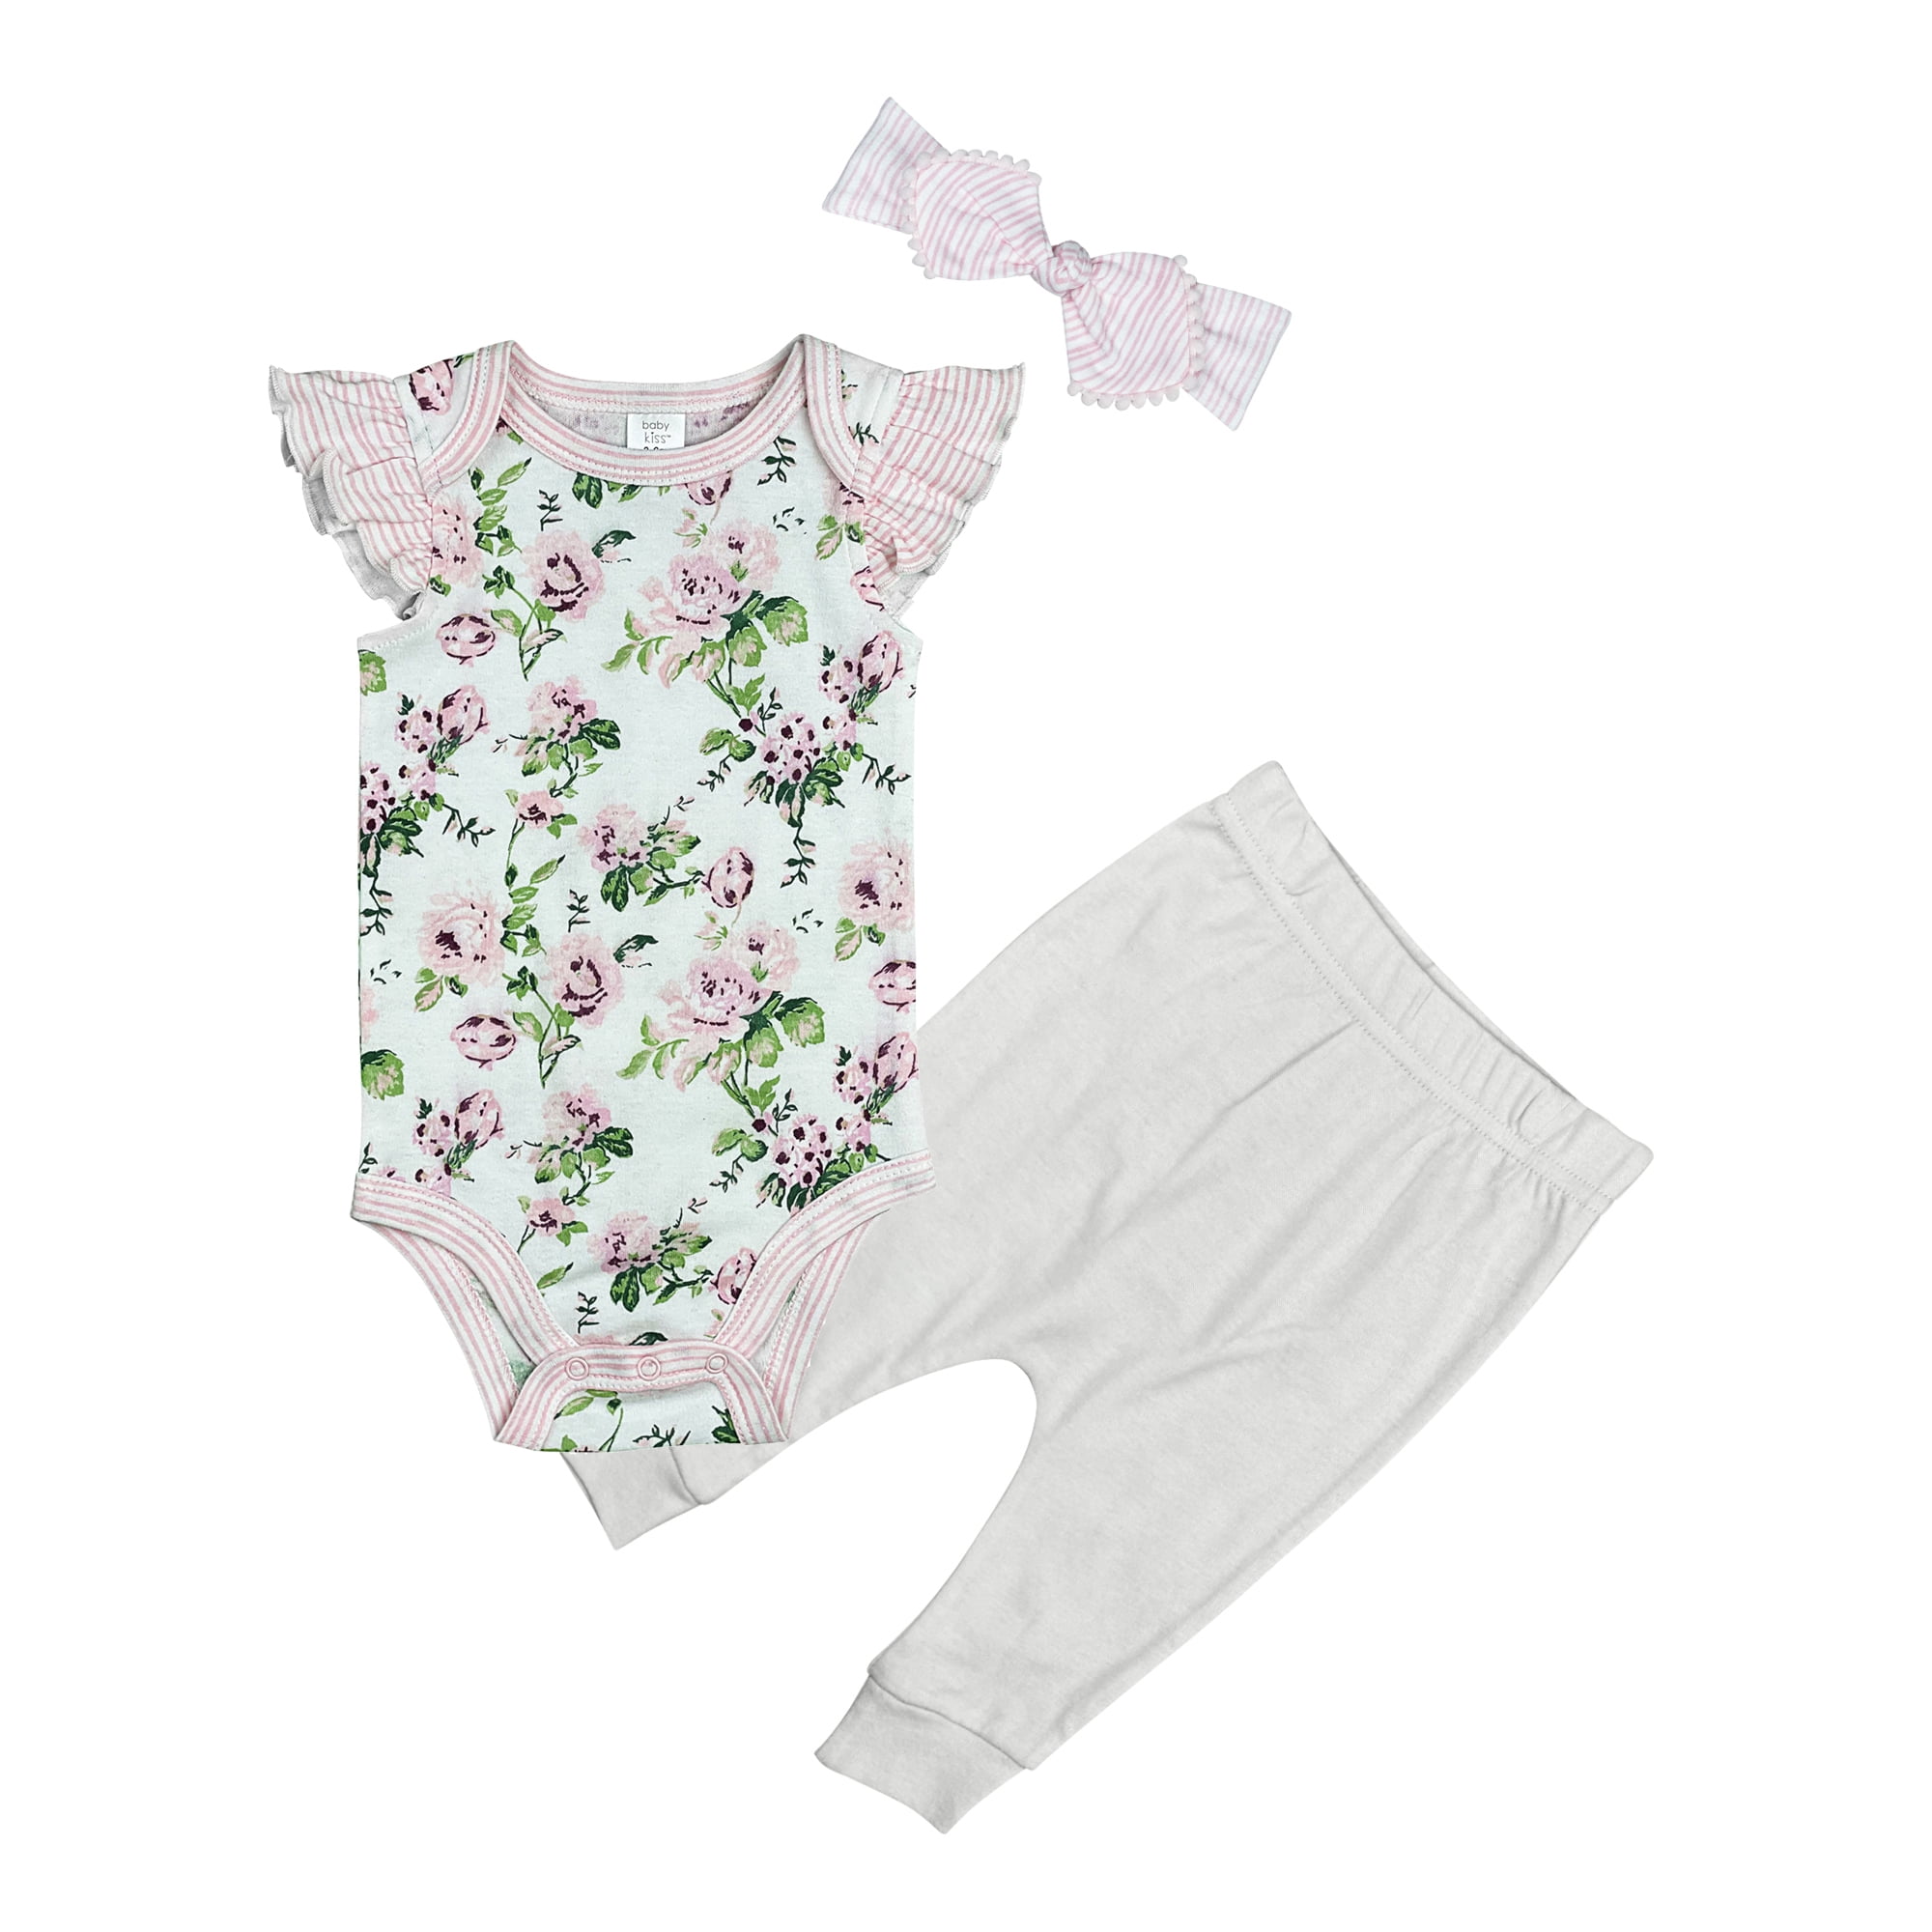 Super Lovely Baby Clothes Set, 